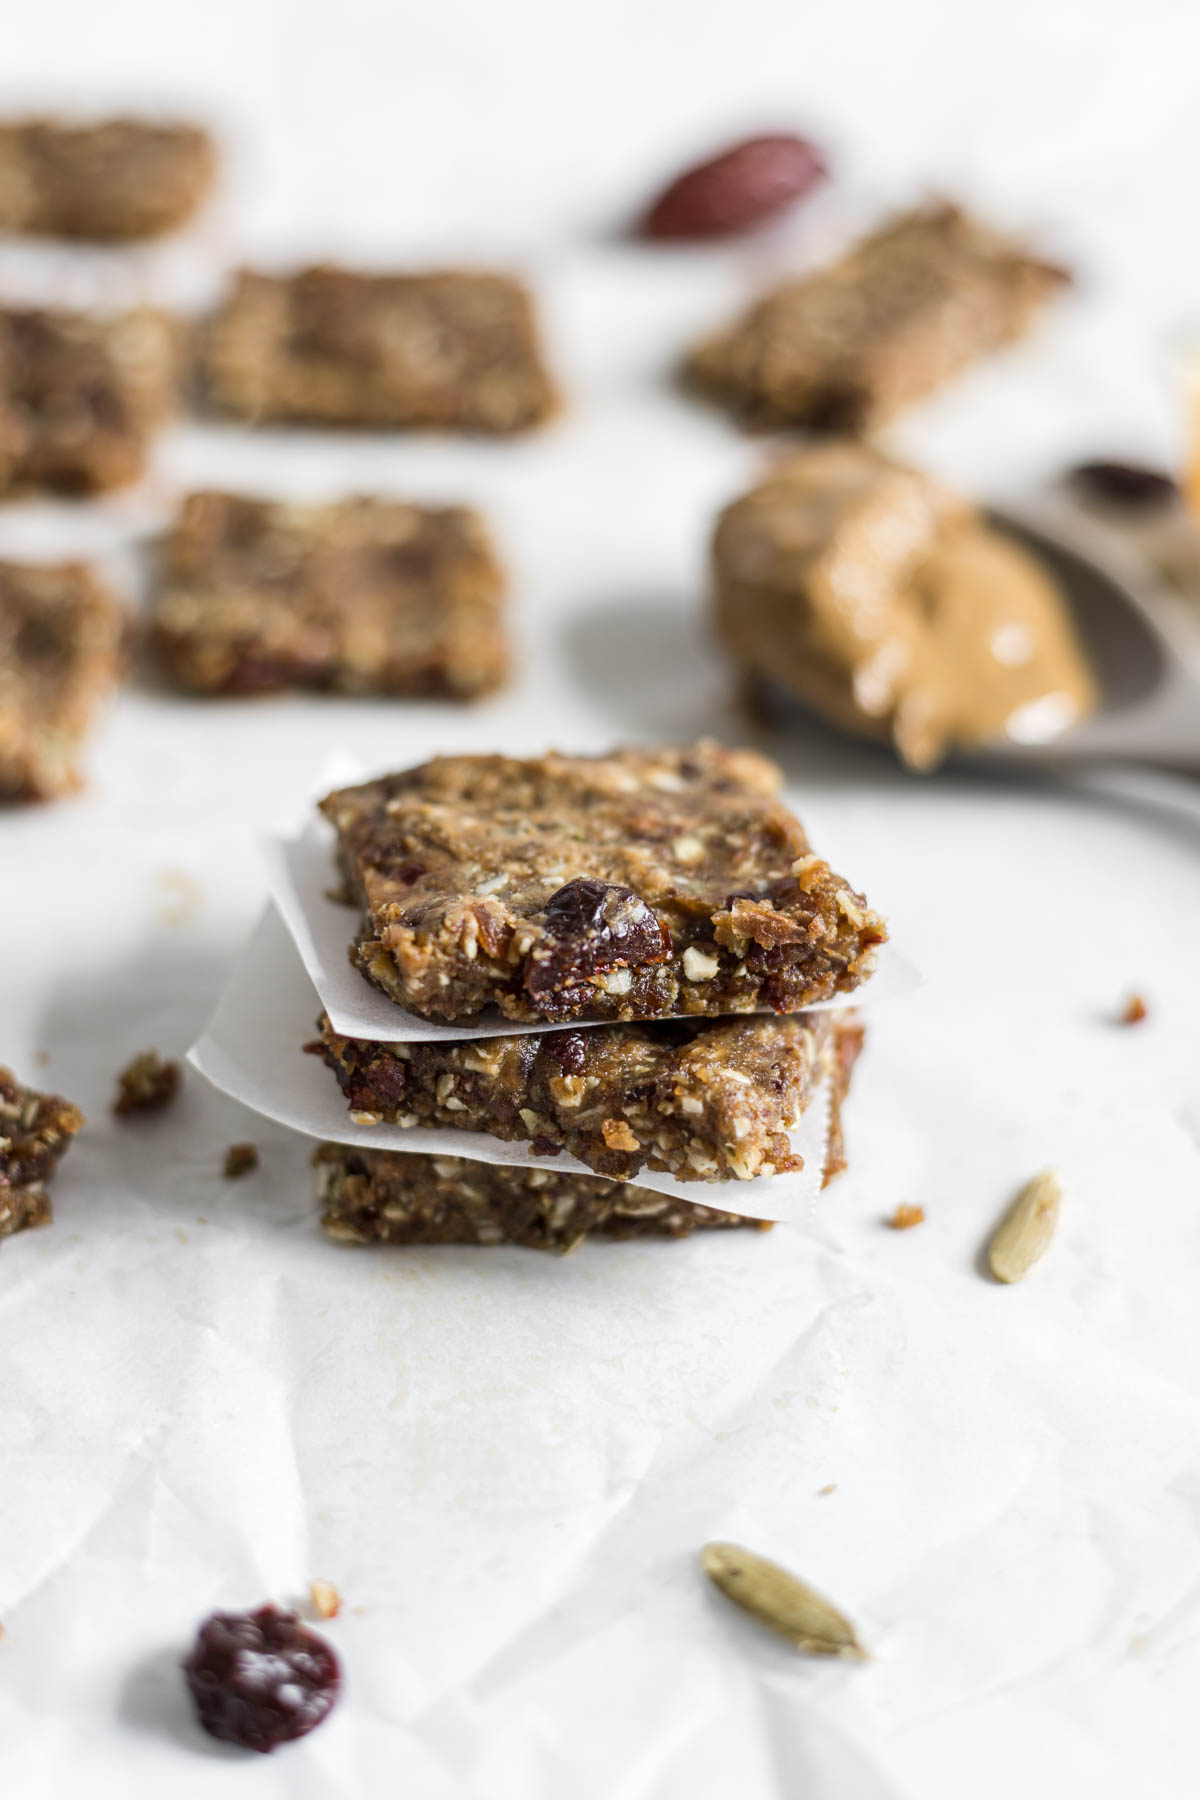 A stack of three Nut-Free Protein Bars. More bars sit in the background as well as a spoon with sunflower butter on it.